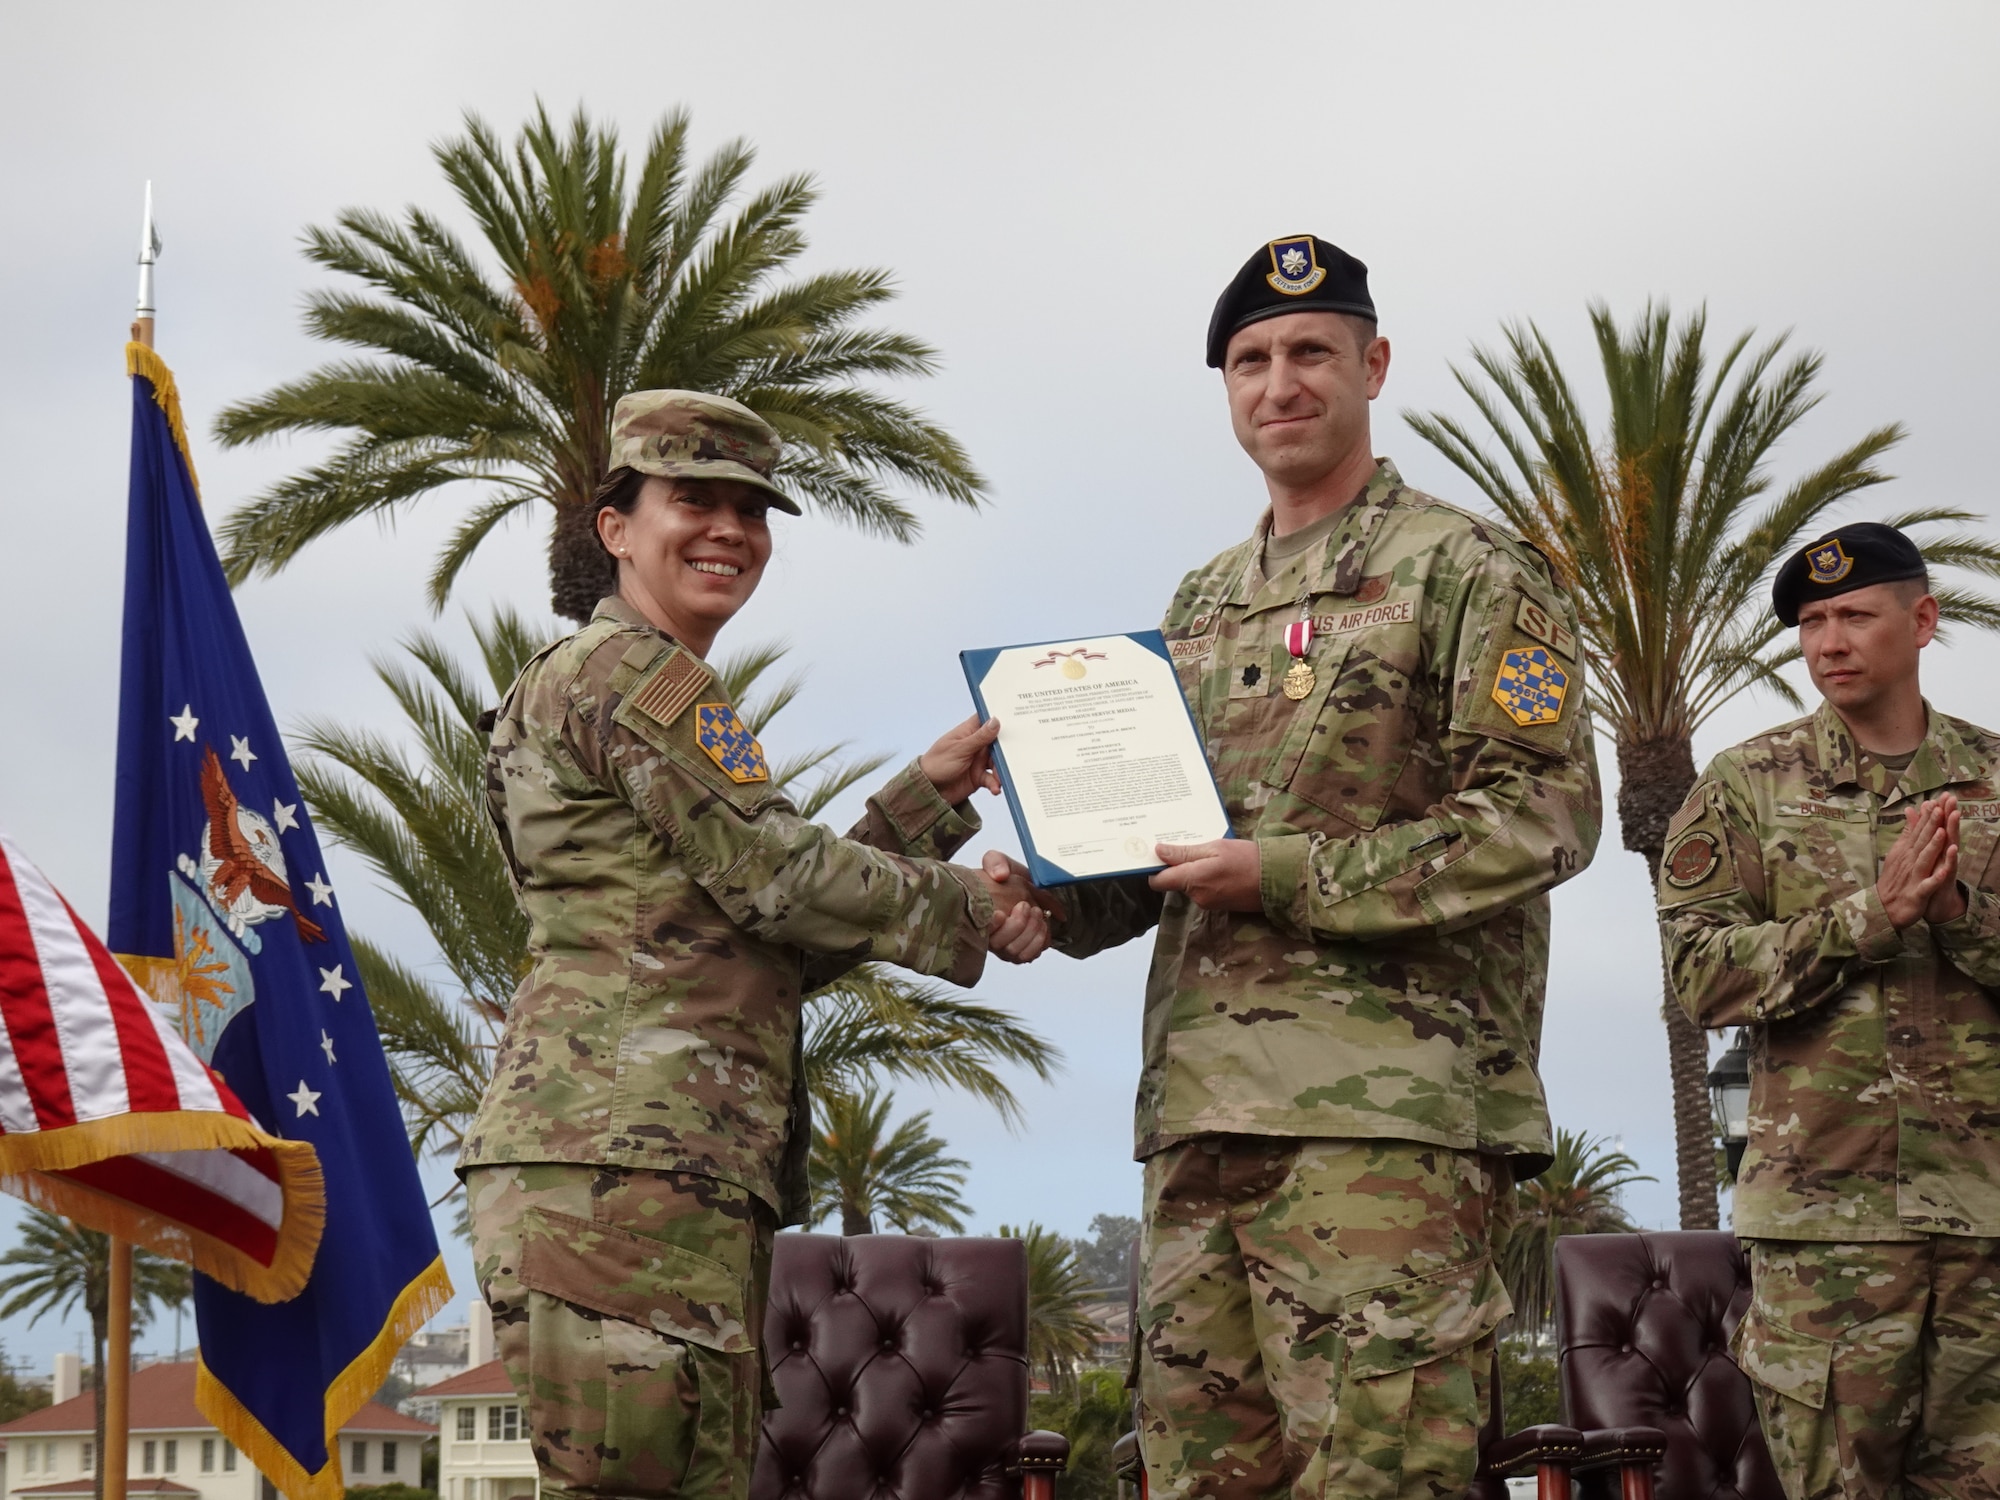 Lieutenant Colonel Nicholas Brence, 61 SFS commander, right, received the Meritorious Service Medal, second oak leaf cluster, from Col. Becky Beers, Los Angeles Garrison commander, left, during his change of command ceremony held on June 1 at Fort MacArthur. He was recognized for several accomplishments including his leadership of the squadron which was recognized as the 2021 United States Space Force’s Outstanding Small Security Forces unit.